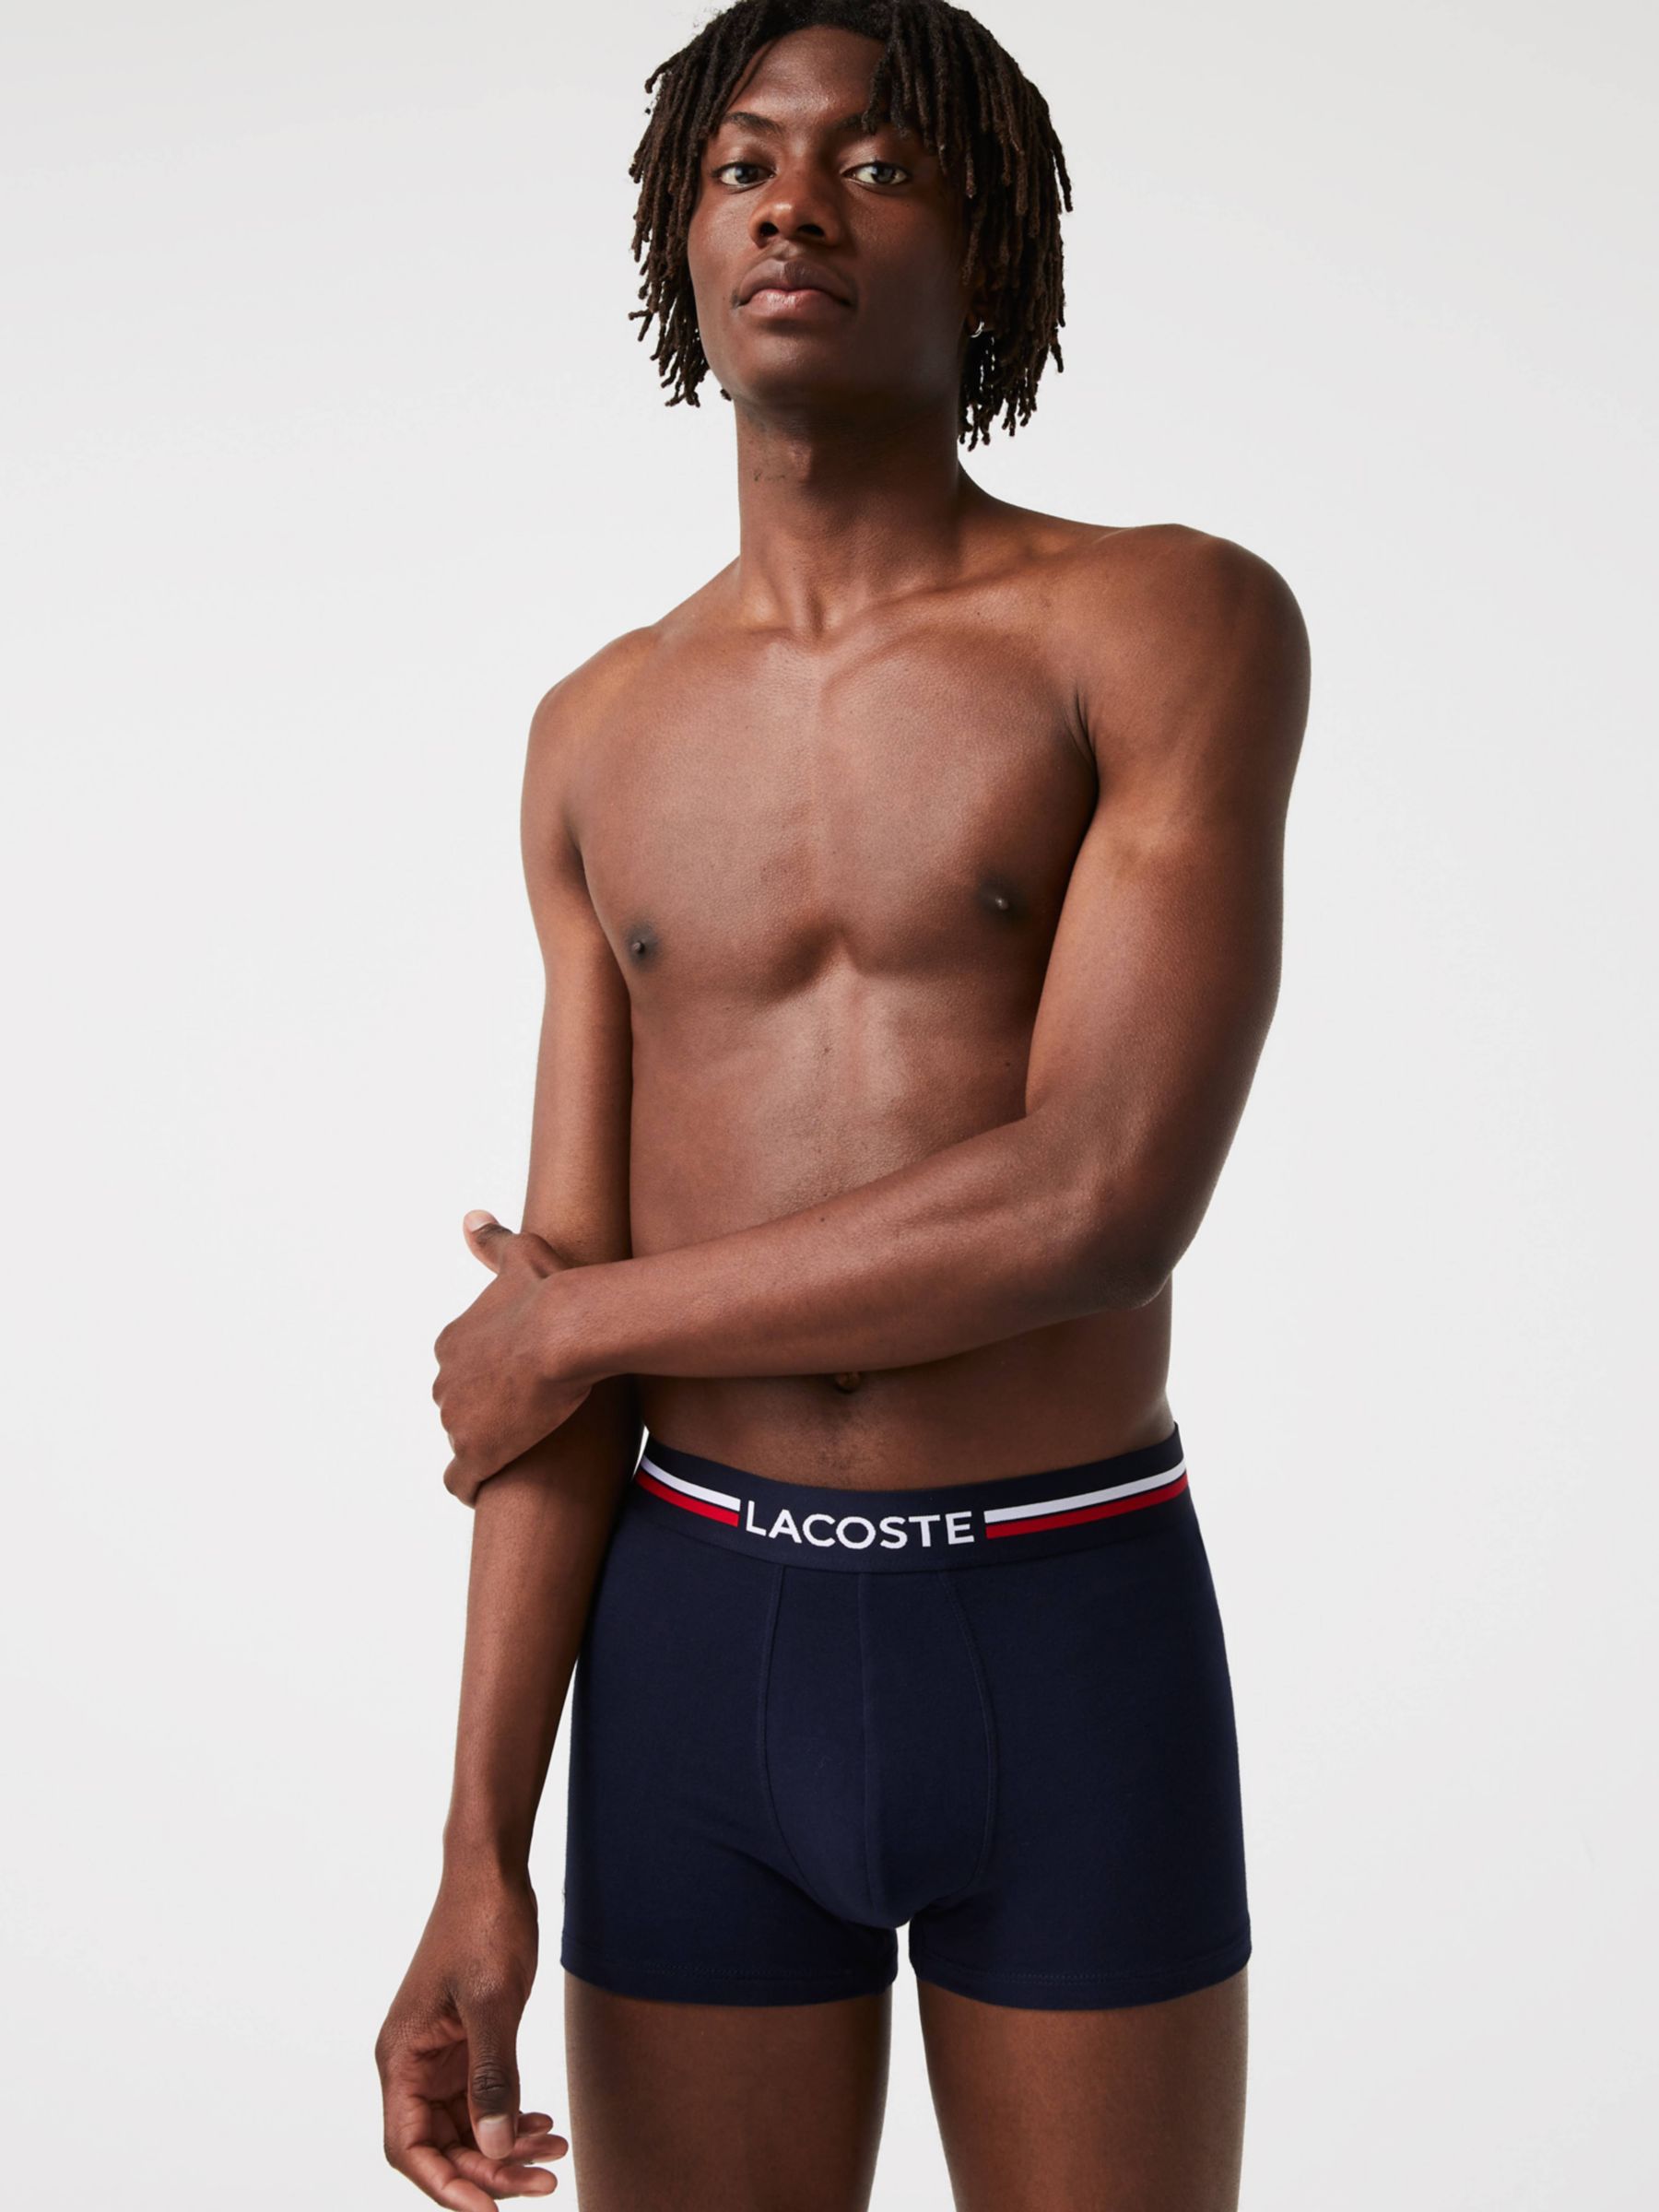 Lacoste Three Tone Waistband Iconic Trunks, Pack of 3, Navy Blue/Grey  Chine/Red at John Lewis & Partners